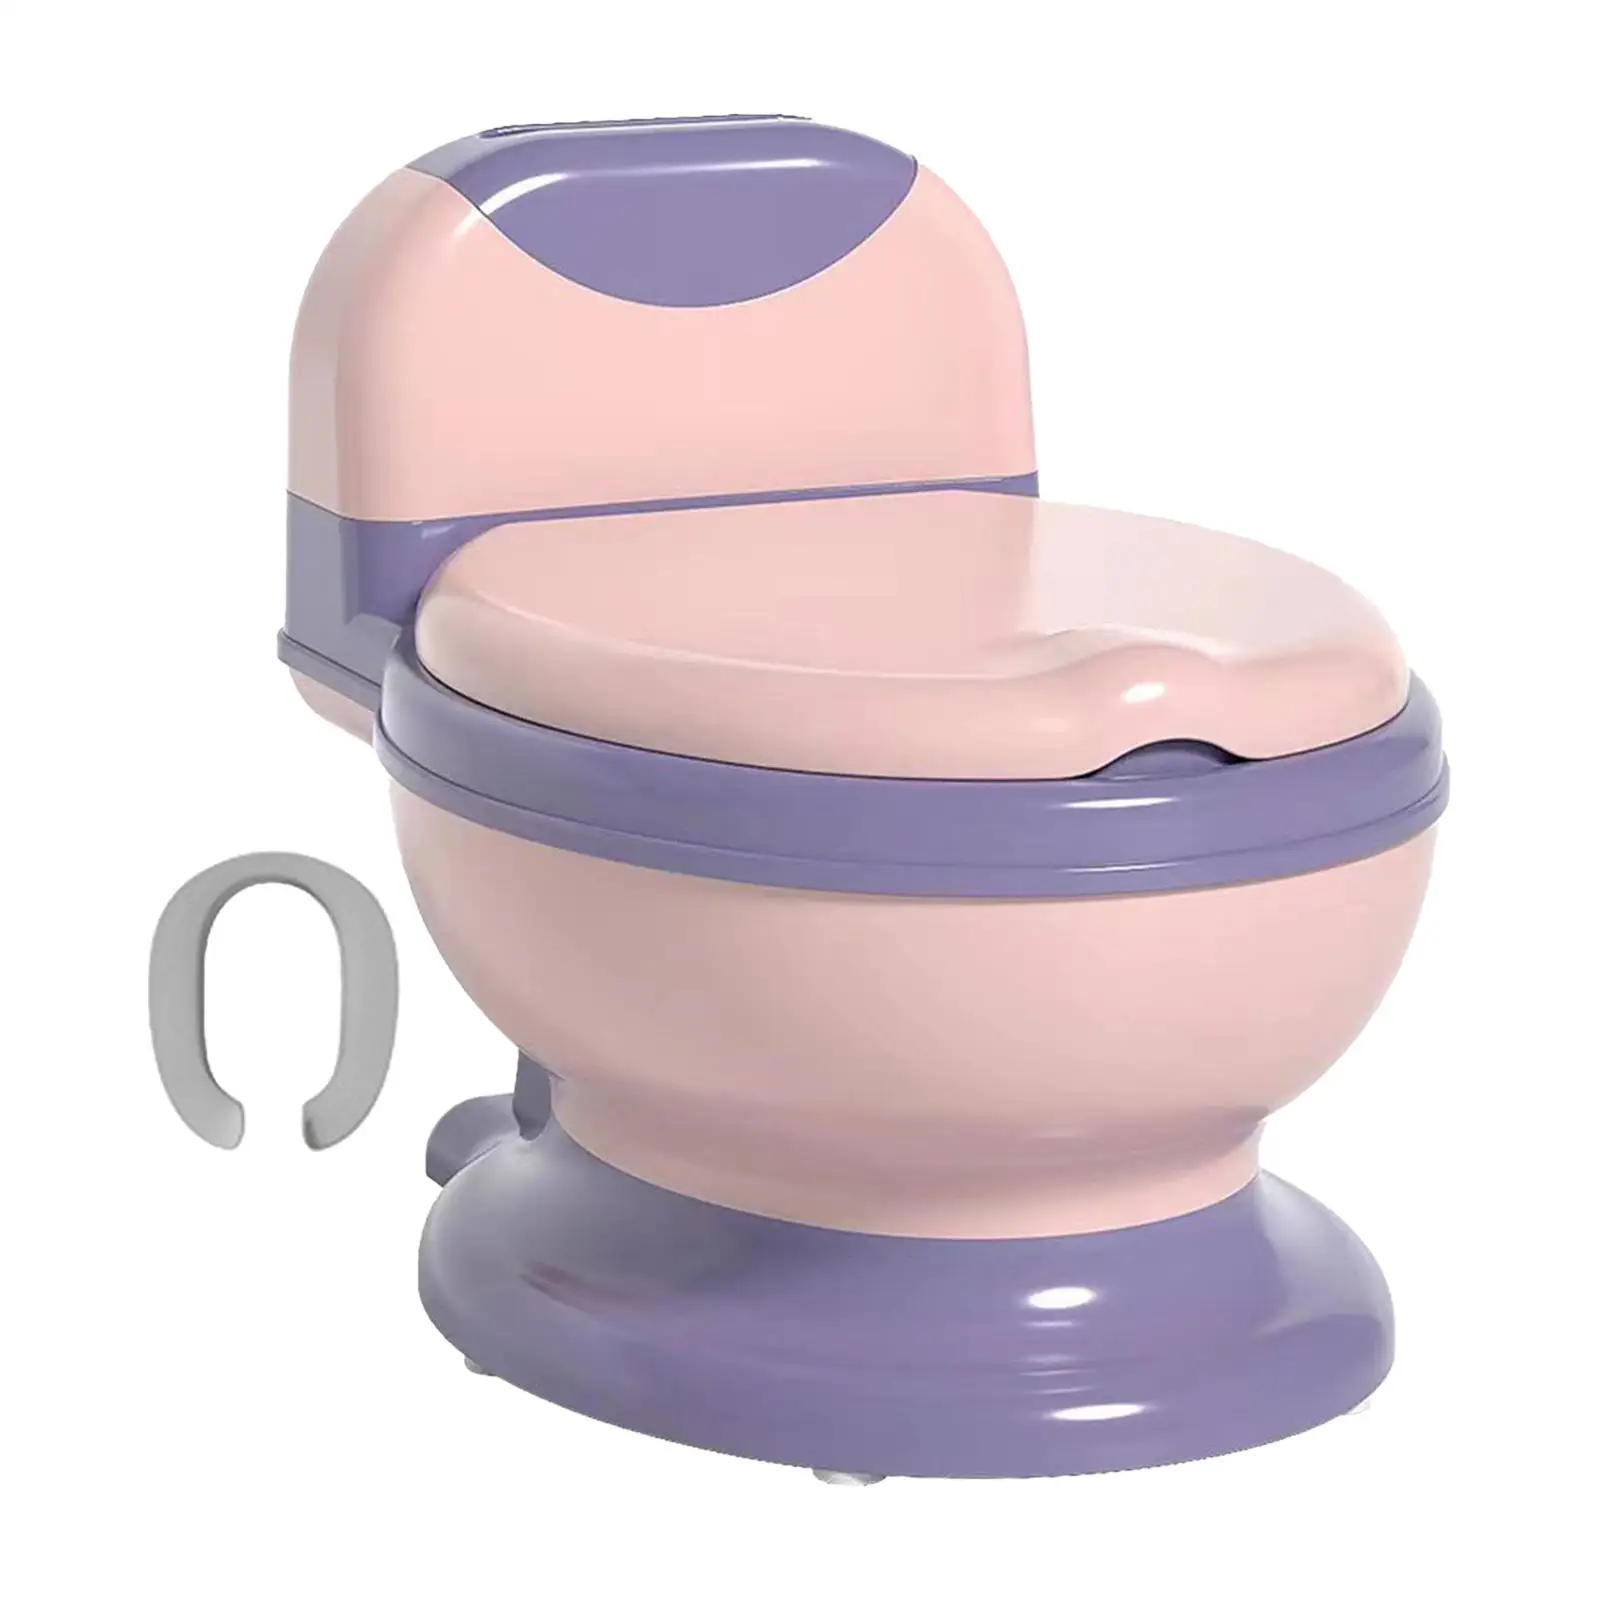 Potty Train Toilet Toilet Training Seat Potty Seat Toddlers Potty Chair Realistic Toilet for Baby Kids Toddlers Boys Girls